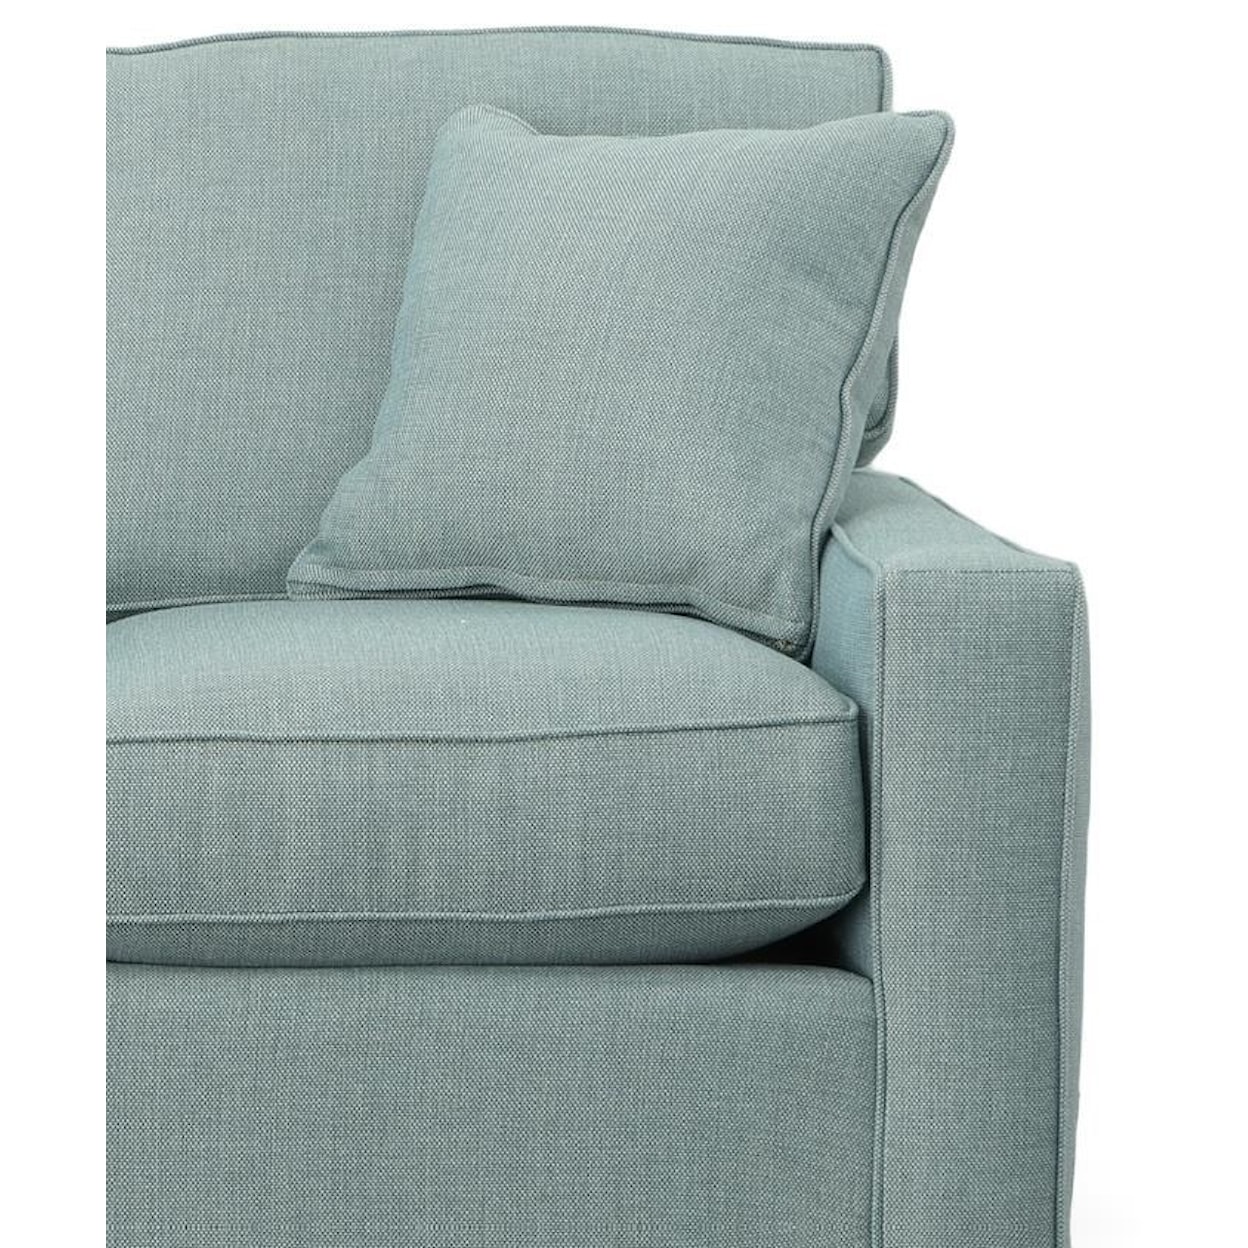 Rowe Monaco Transitional Loveseat with Track Arms